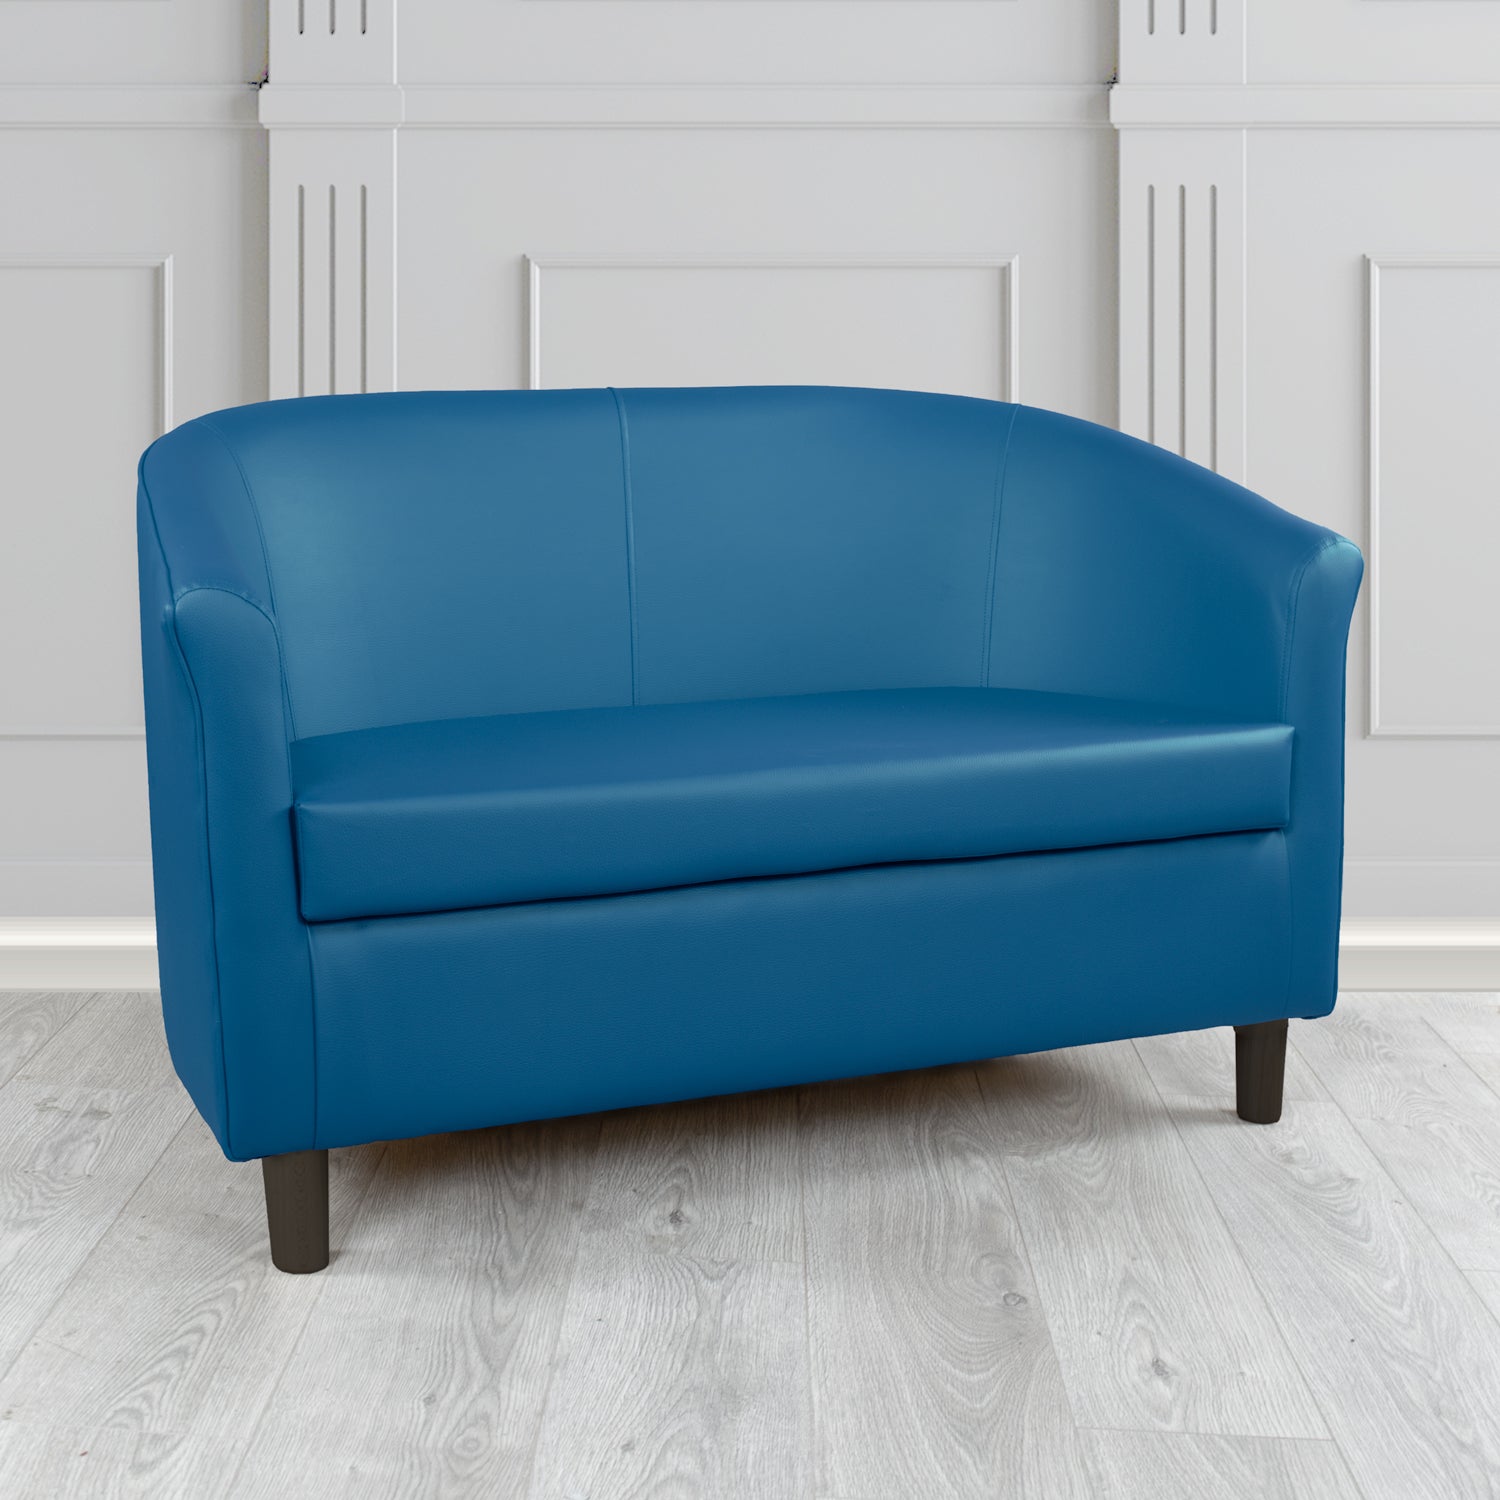 Tuscany 2 Seater Tub Sofa in Madrid Royal Faux Leather - The Tub Chair Shop